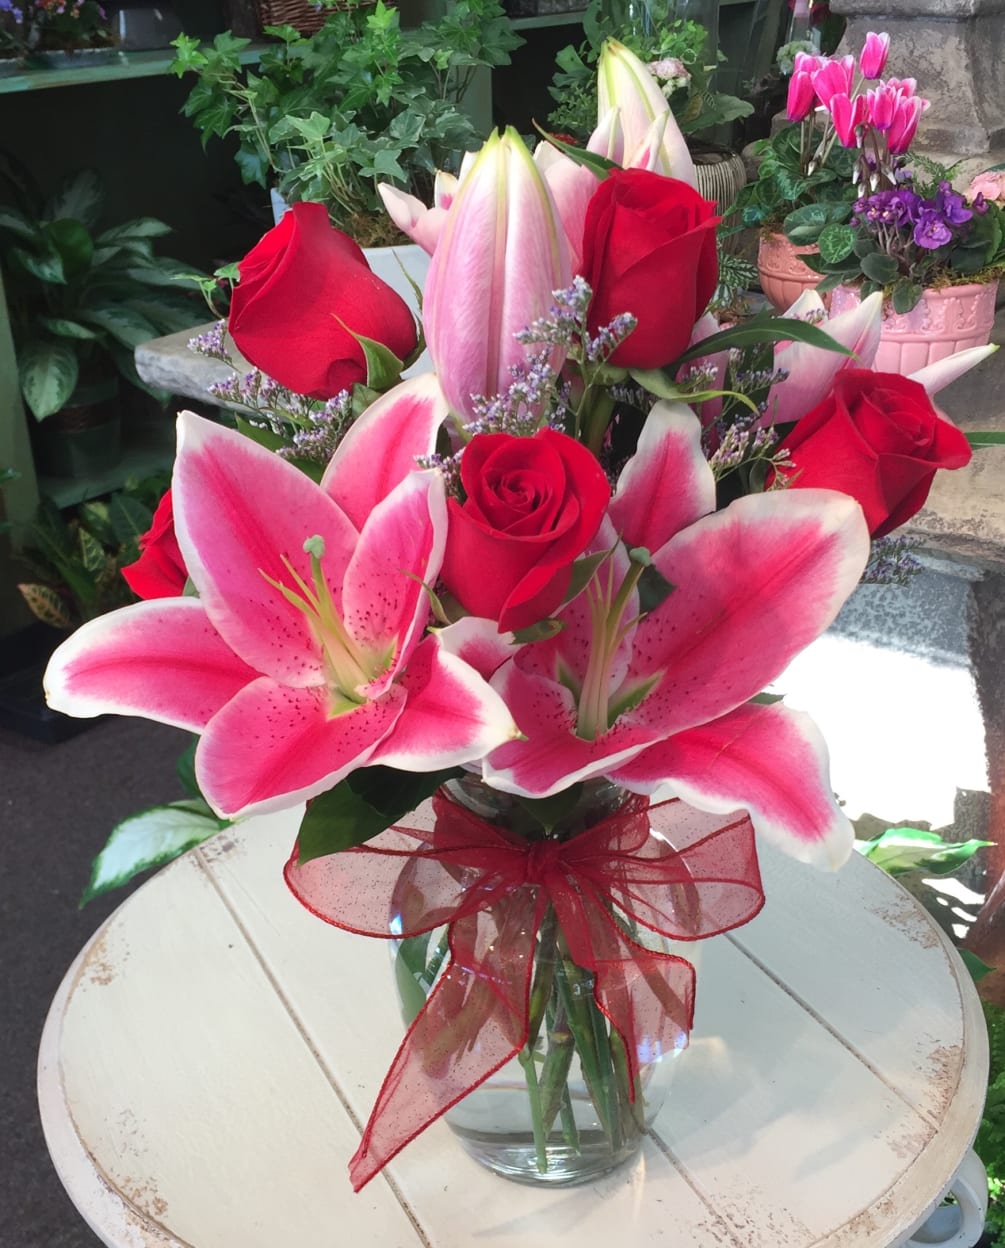 Red Roses and Hybrid Pink Lillies fill this vase to overflowing. This